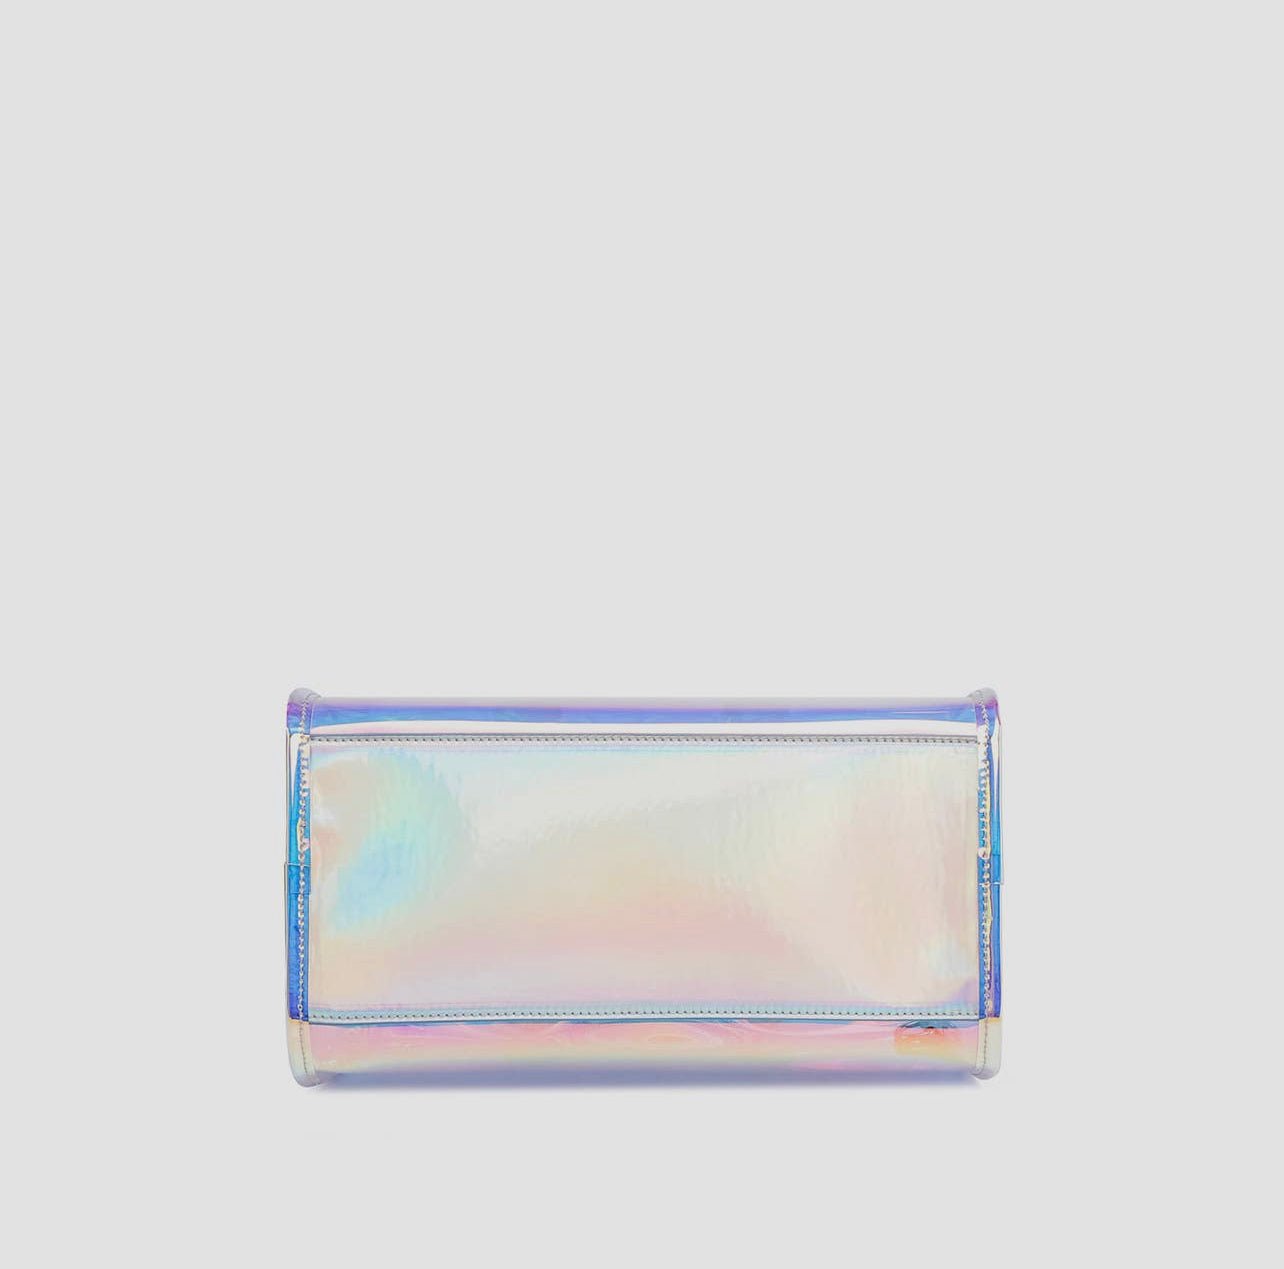 Iced Out Hologram Satchel